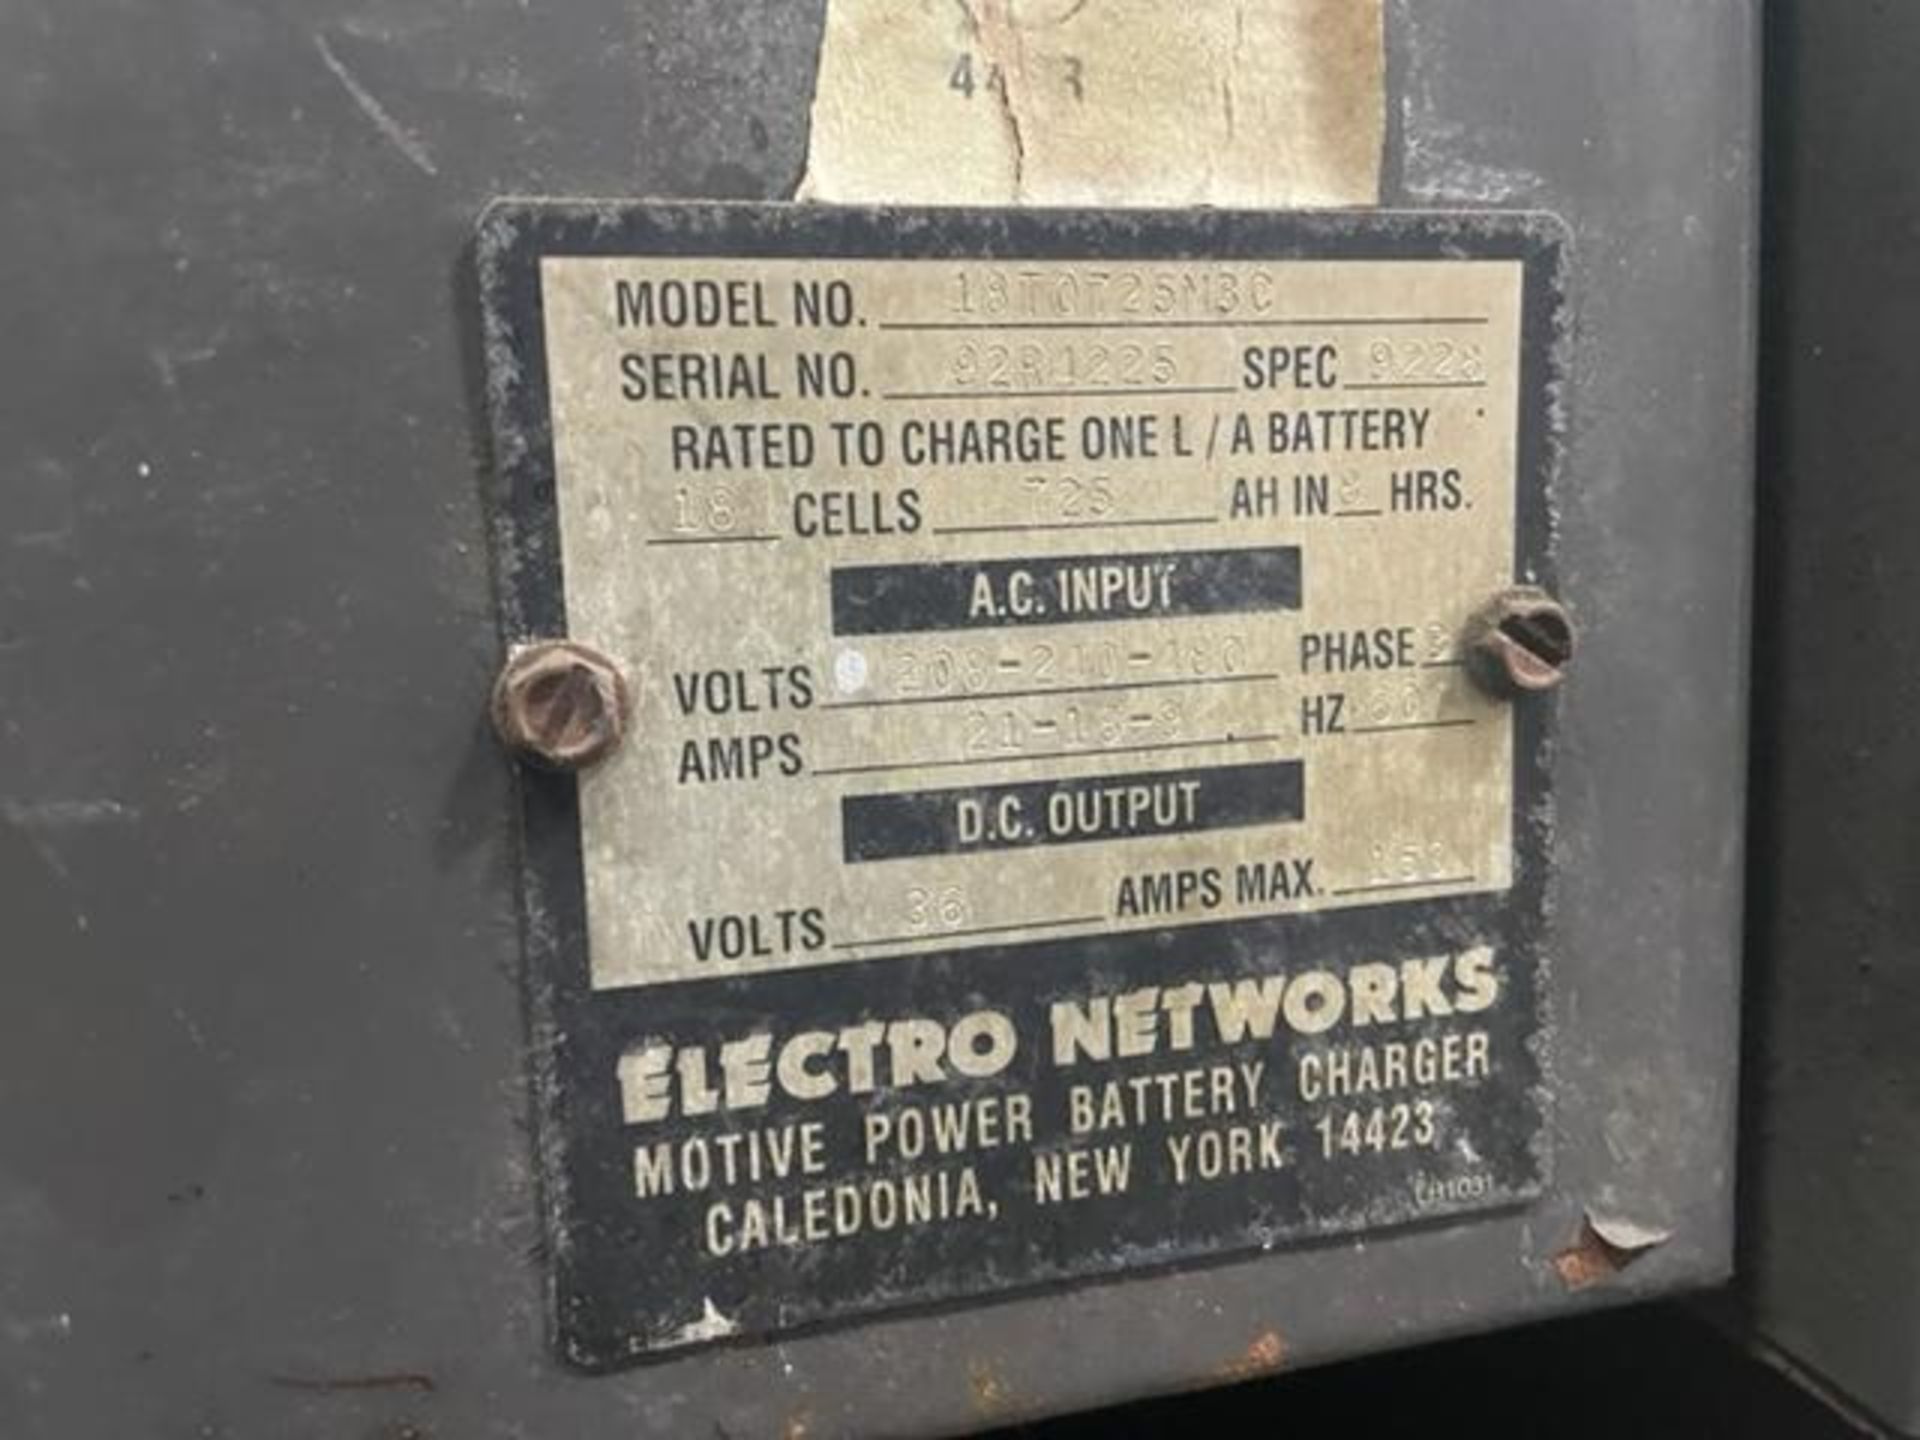 ELECTRO 36 VOLT BATTERY CHARGER MODEL 18T0725M3C, 3 PHASE - Image 2 of 2